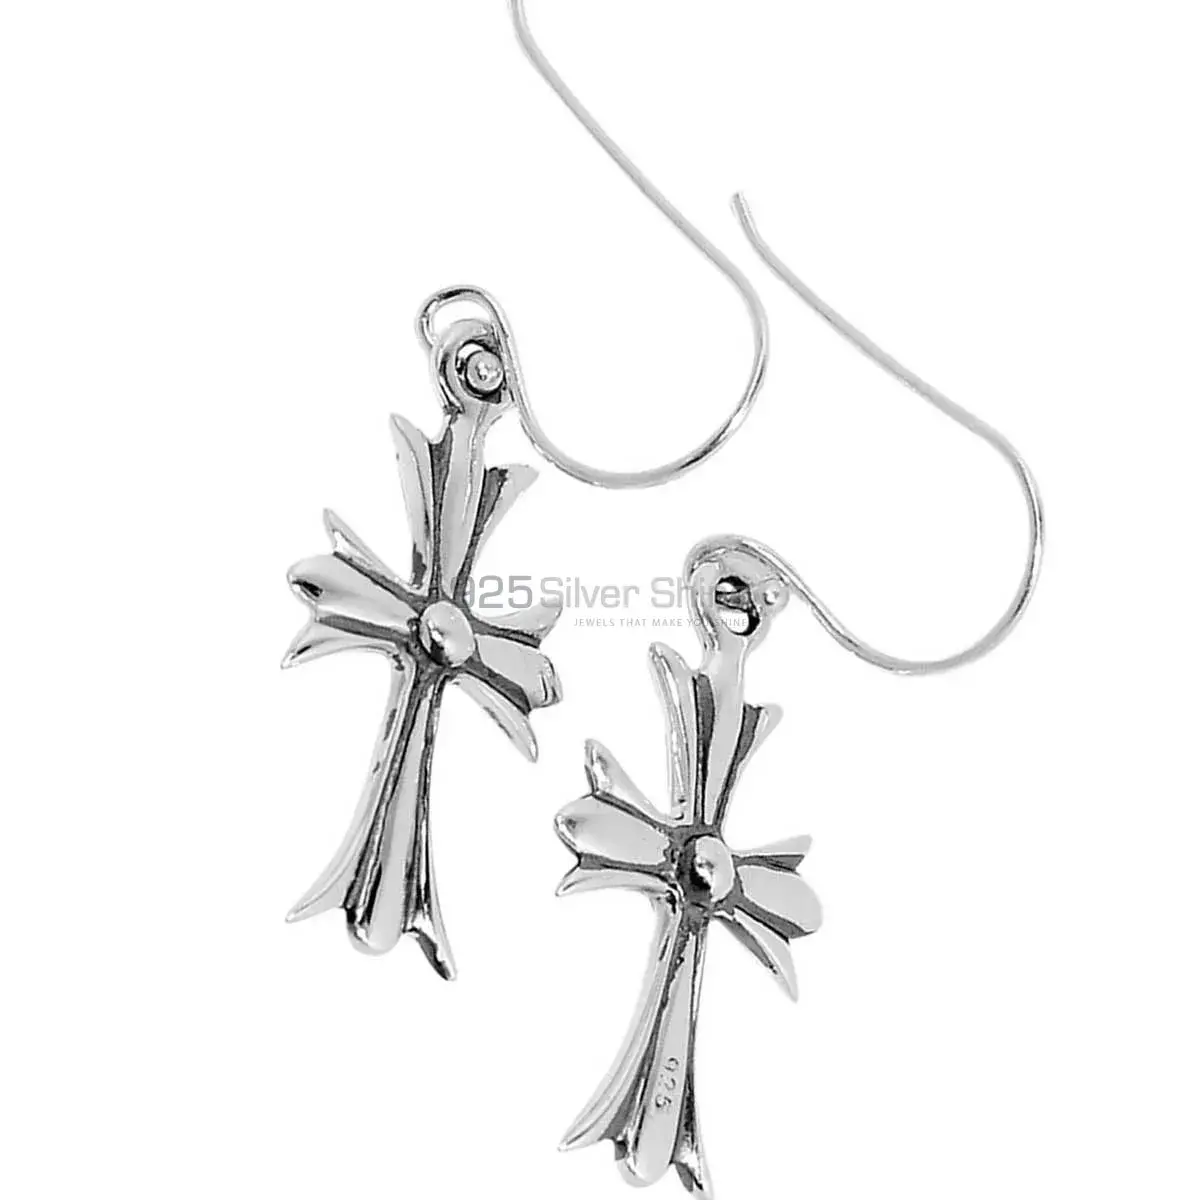 Inexpensive 925 Sterling Silver Oxidized Cross earring 925SE2862_2